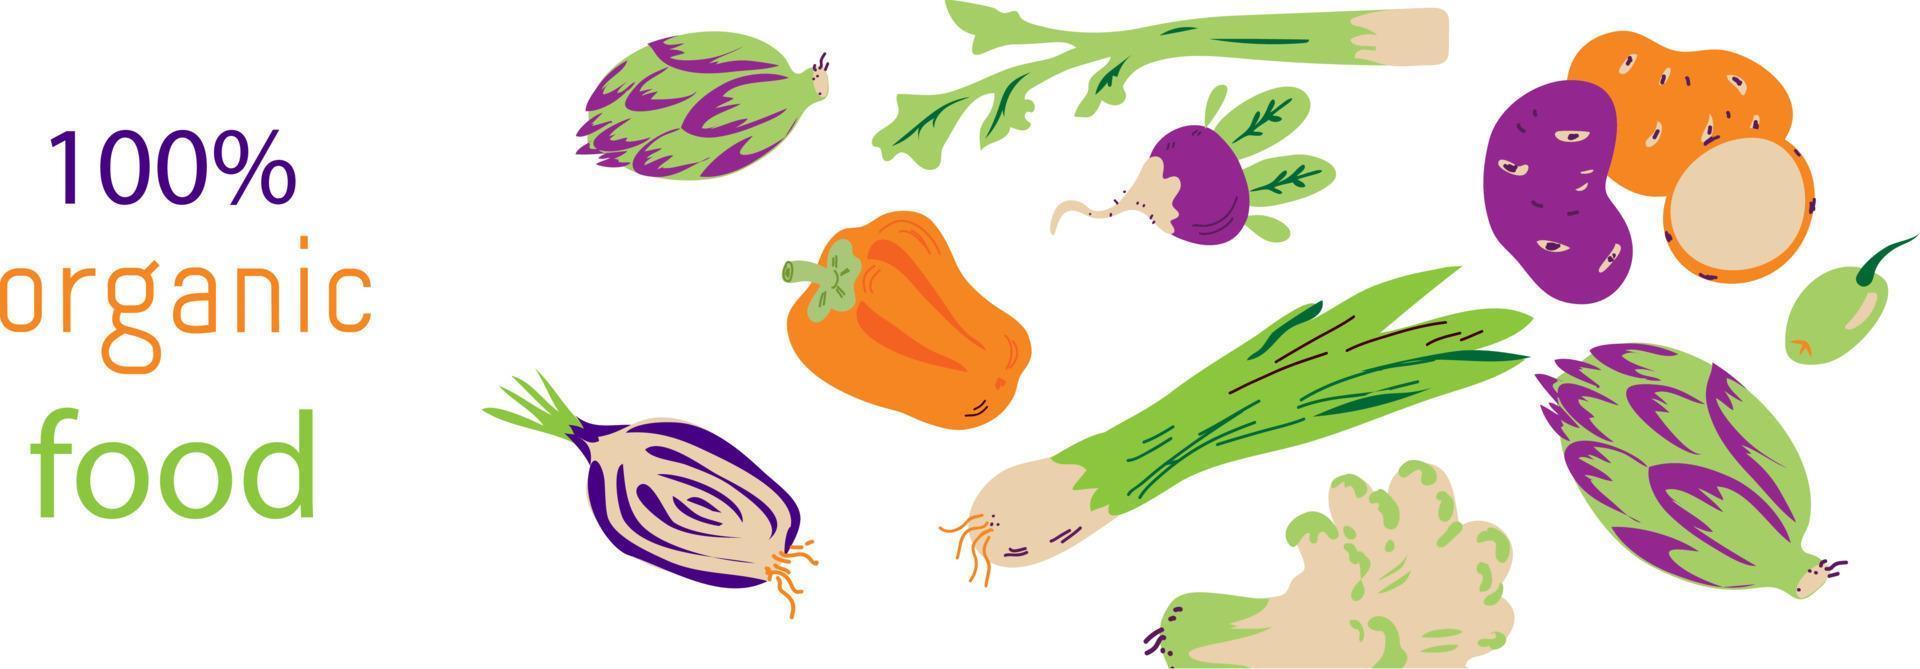 Template of organic vegetarian food flyer or label with icons of vegetables the flat vector illustration on white background. Concept for ecological vegan and farmers fairs and stores.